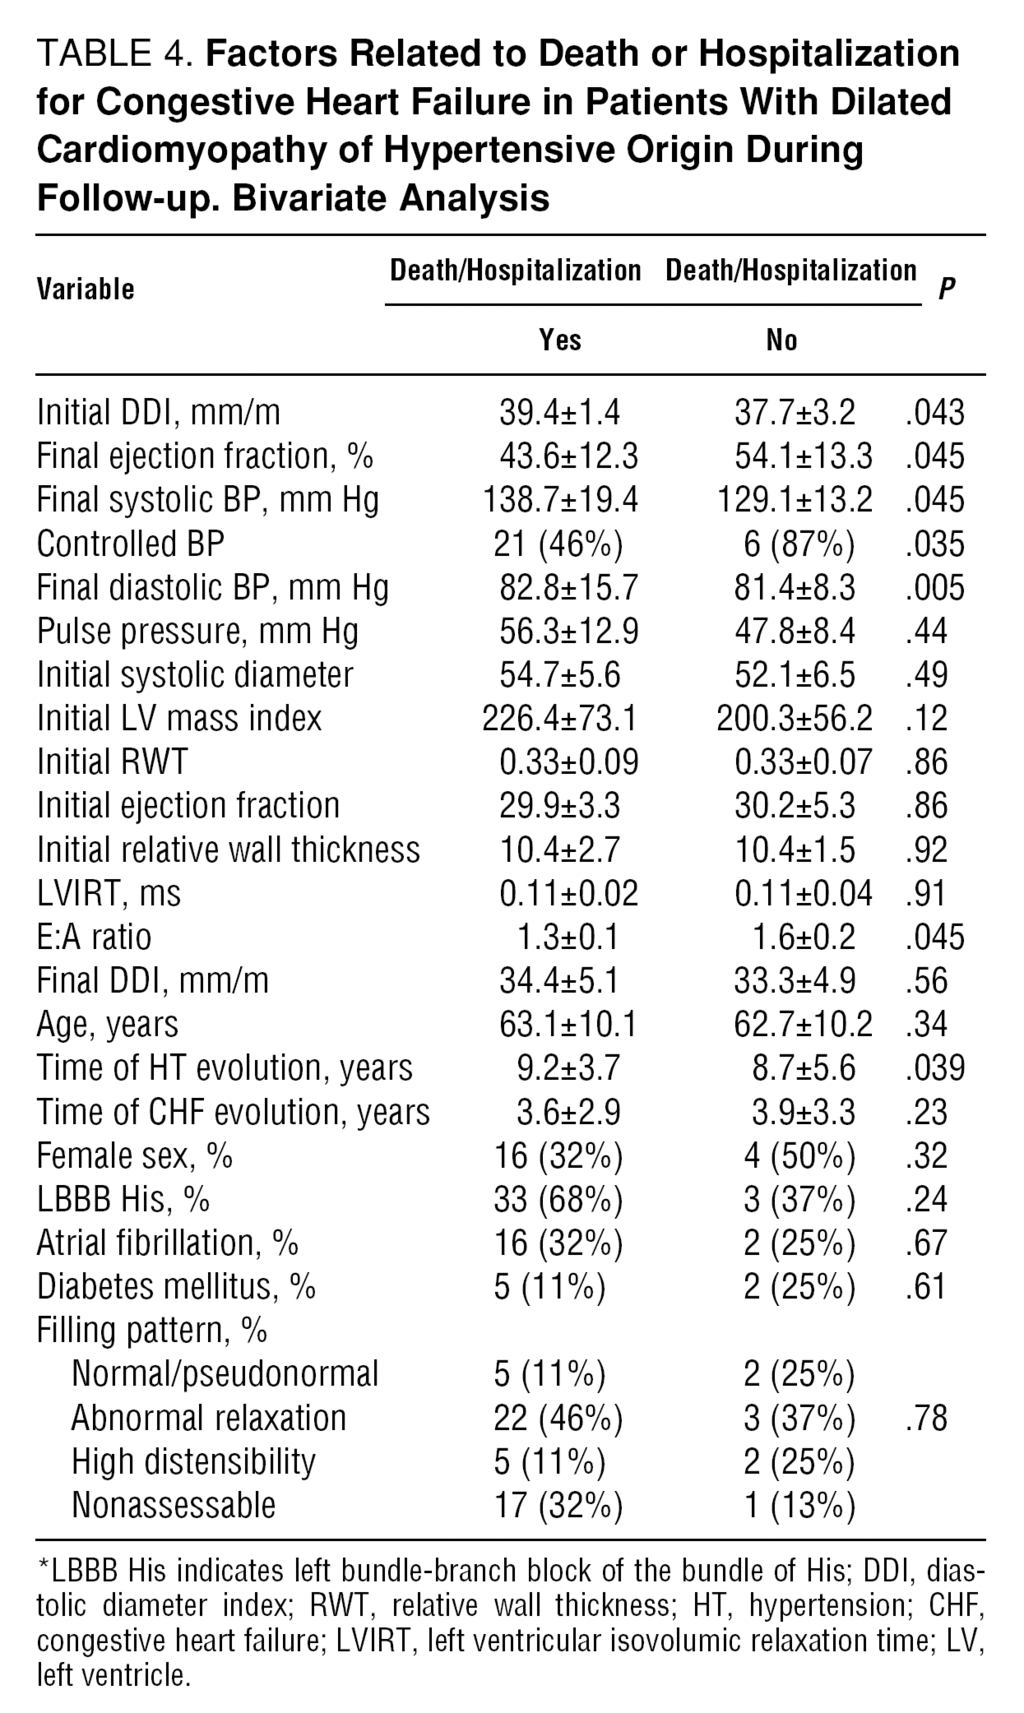 Clinical Outcome And Reversibility Of Systolic Dysfunction In Patients With Dilated Cardiomyopathy Due To Hypertension And Chronic Heart Failure Revista Espanola De Cardiologia